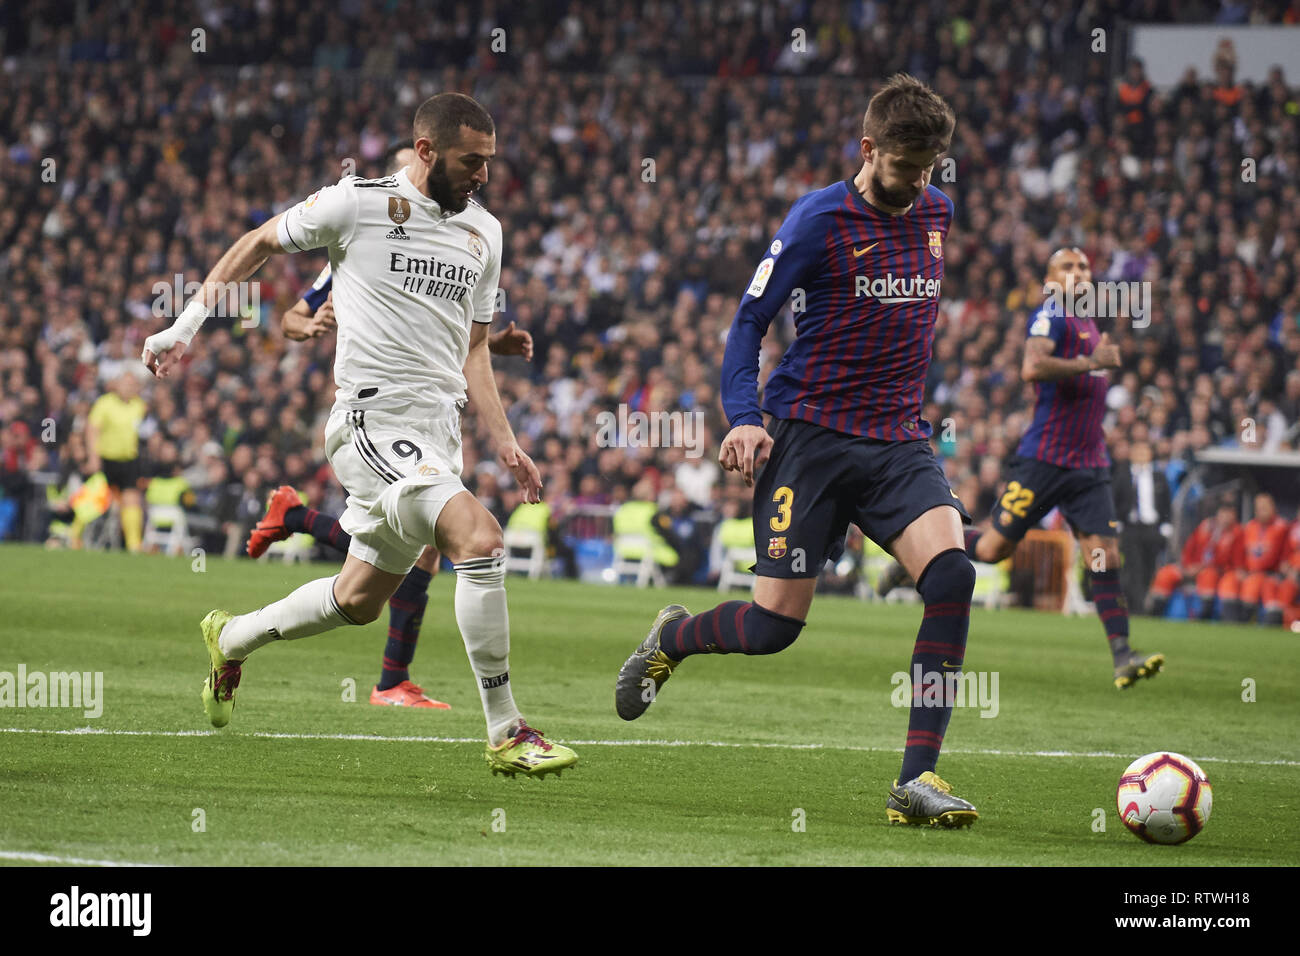 Madrid, Madrid, Spain. 2nd Mar, 2019. Karim Benzema (forward; Real Madrid), Gerard Pique (defender; Barcelona) in action during La Liga match between Real Madrid and FC Barcelona at Santiago Bernabeu Stadium on March 3, 2019 in Madrid, Spain Credit: Jack Abuin/ZUMA Wire/Alamy Live News Stock Photo